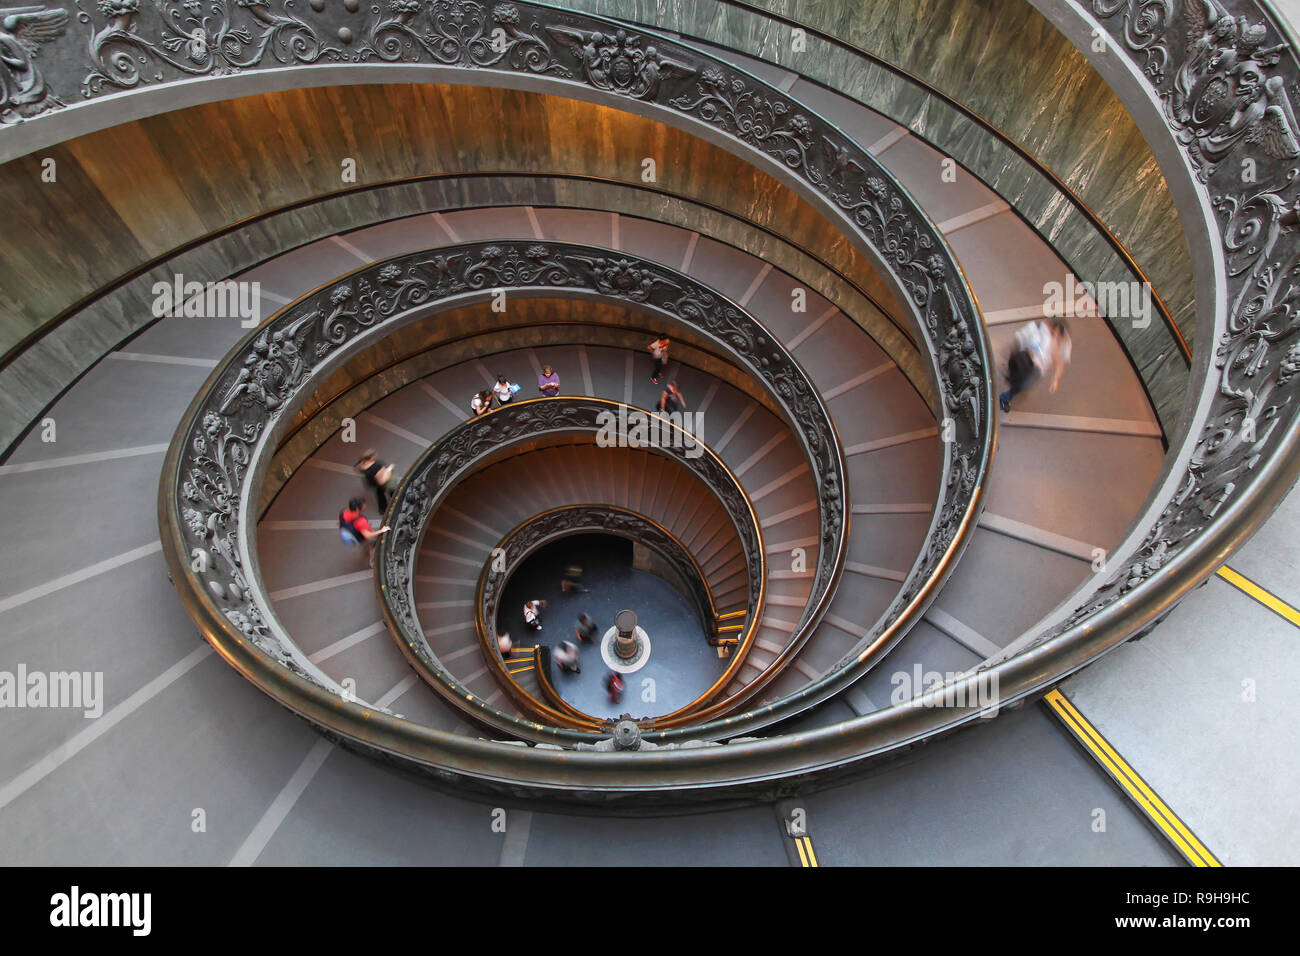 ROME, ITALY - OCTOBER 26: The Bramante Staircase in Vatican on OCTOBER 26, 2009. Double Helix Staircase in Vatican. Stock Photo